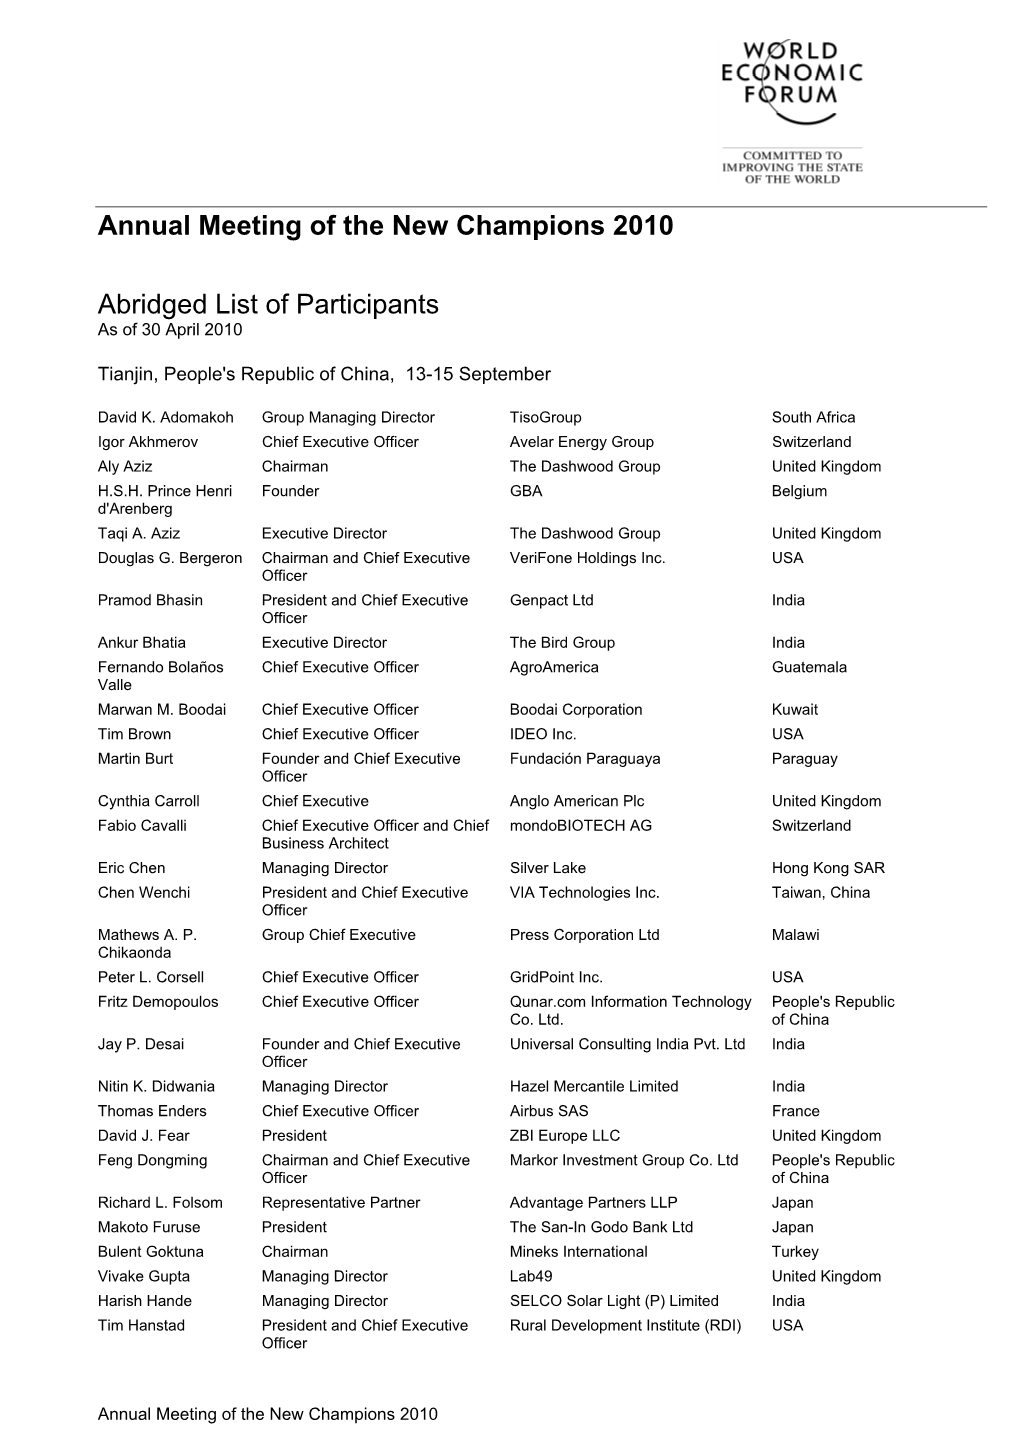 Annual Meeting of the New Champions 2010 Abridged List Of